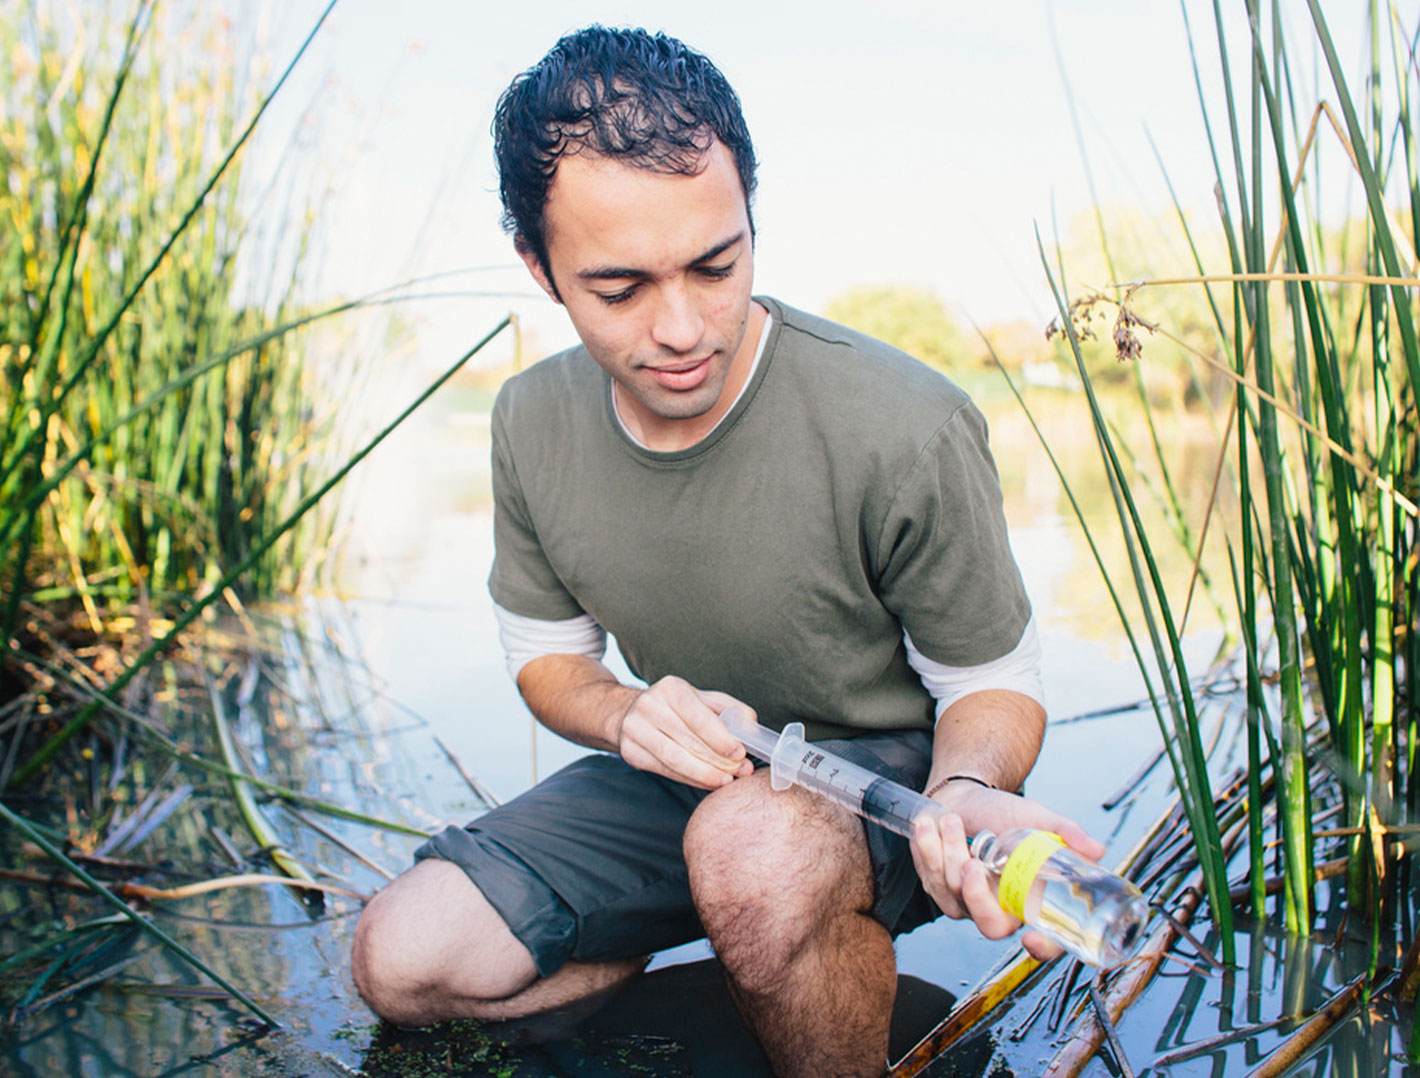 Research student in water collecting samples